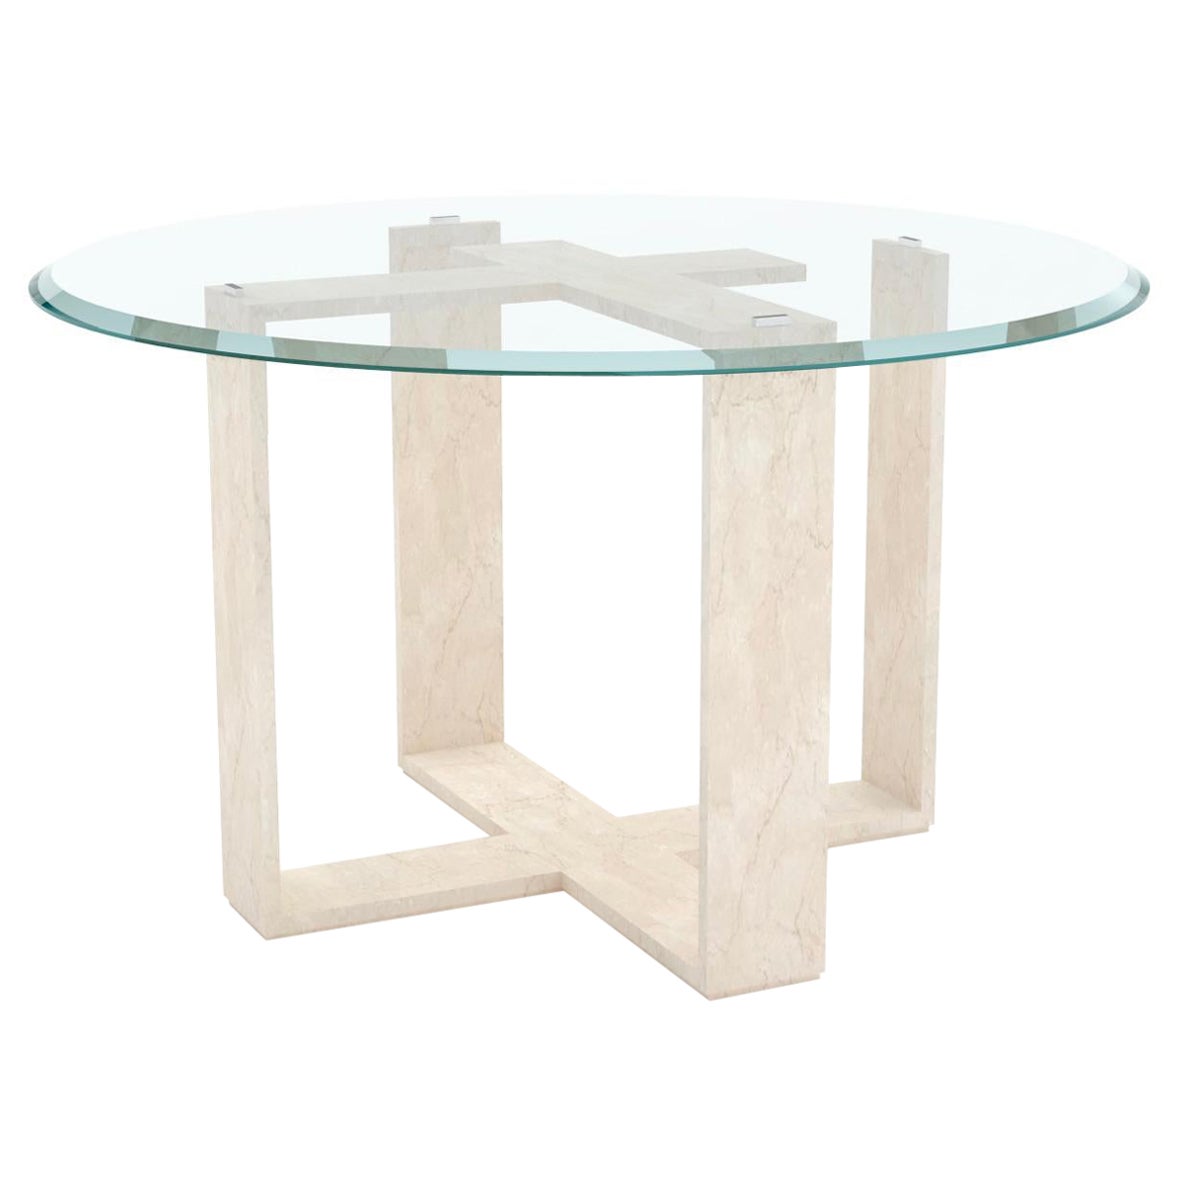 Simple Frame, 21st Century Modern Crema Marble Table by Luca Scacchetti For Sale